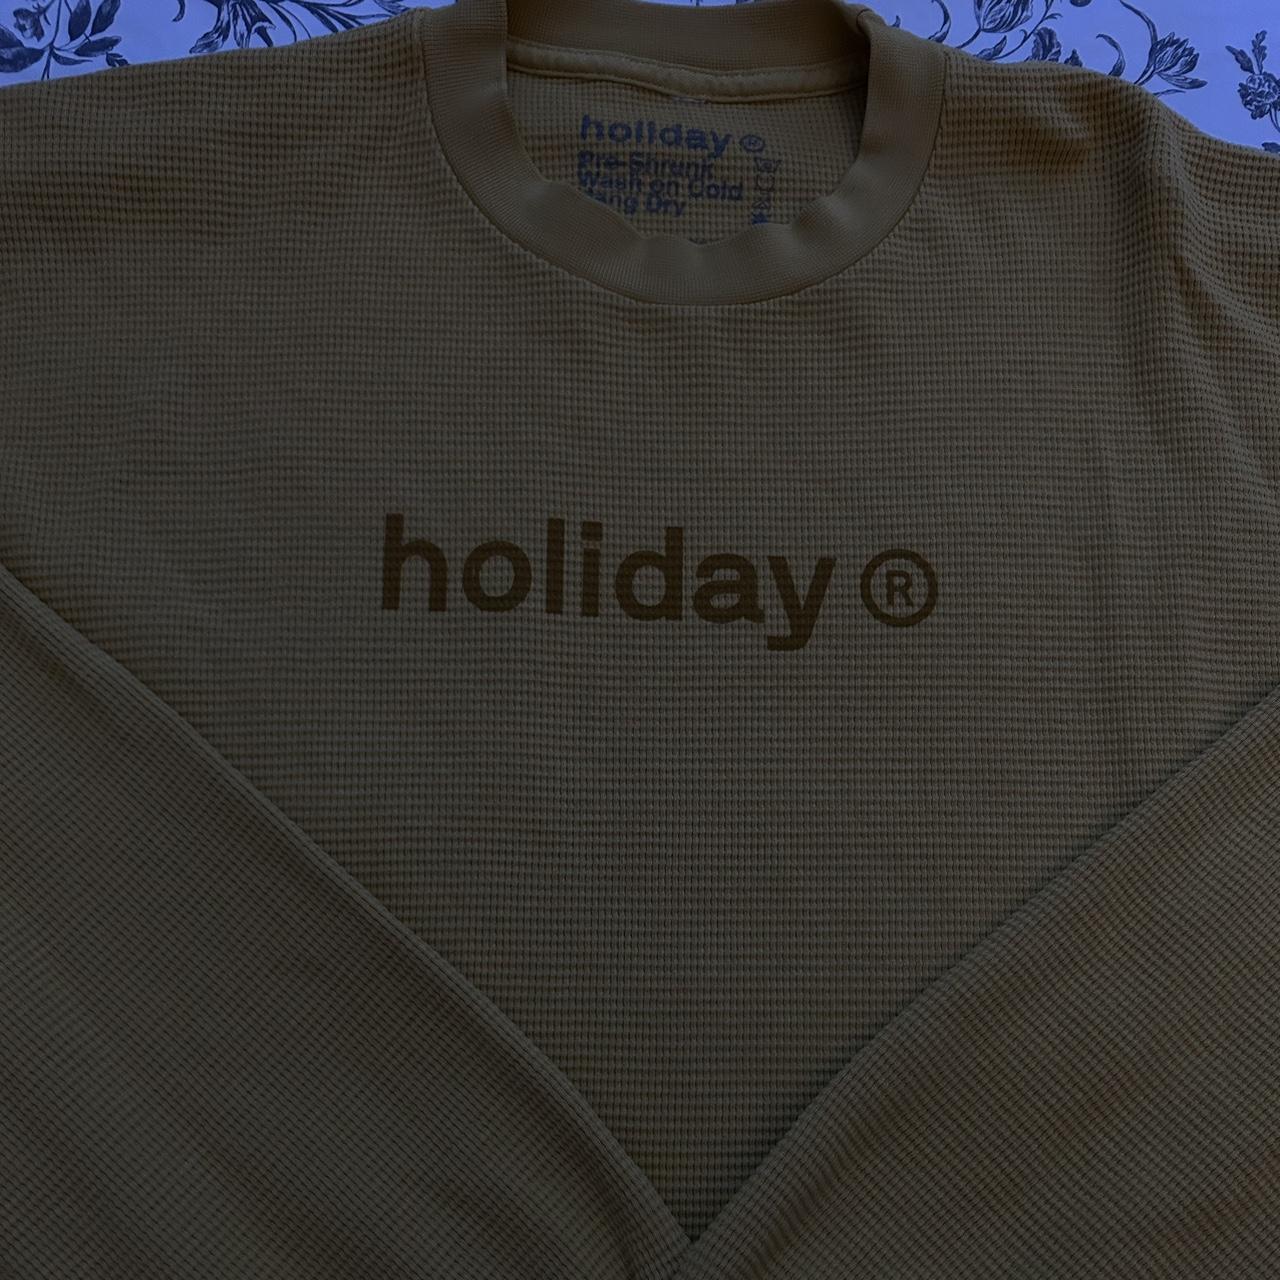 Holiday The Label Men's Shirt